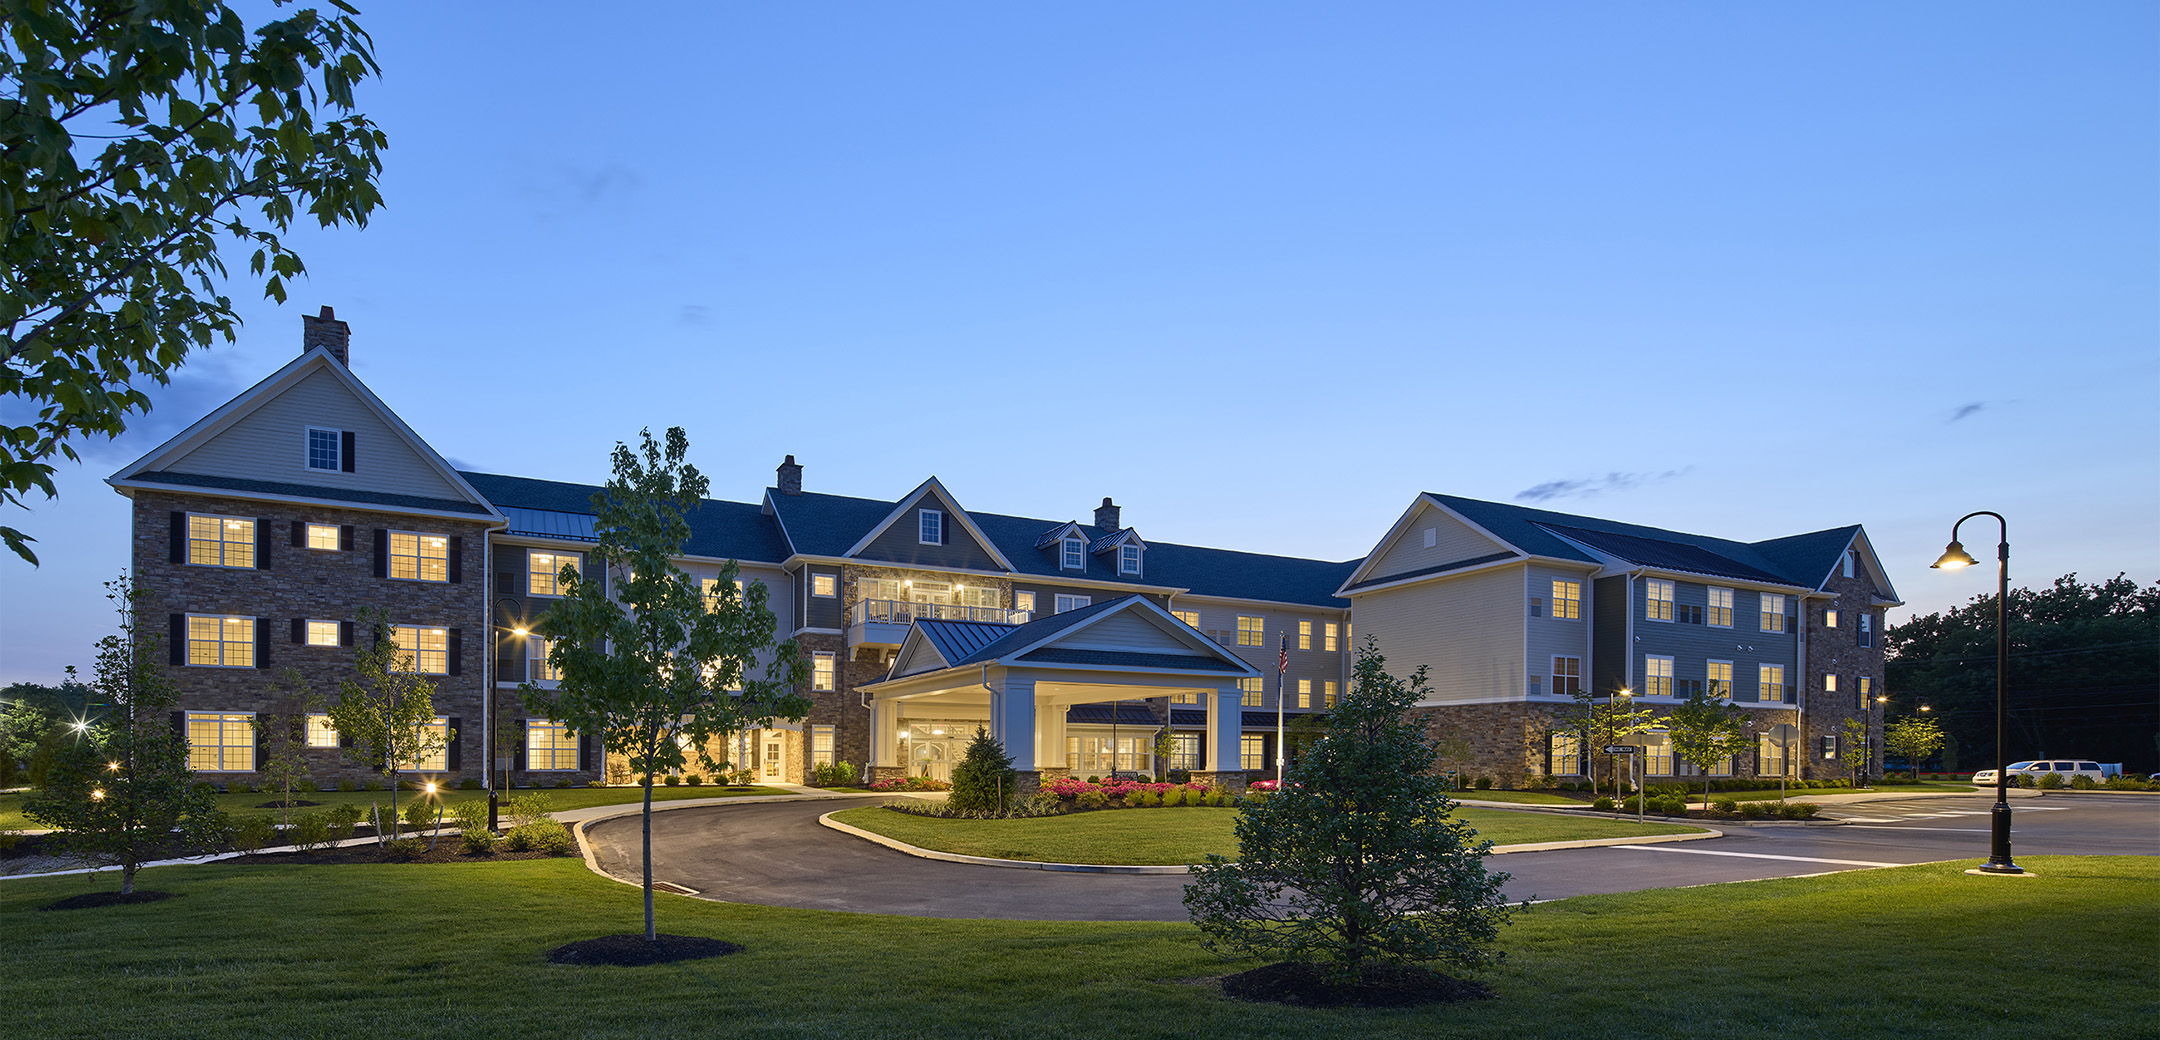 An exterior nighttime image of the Arbor Terrace Exton stone brick, white wood accents and grey shingle roofing with a driveway, side parking lot and grass lawn with trees in the foreground.